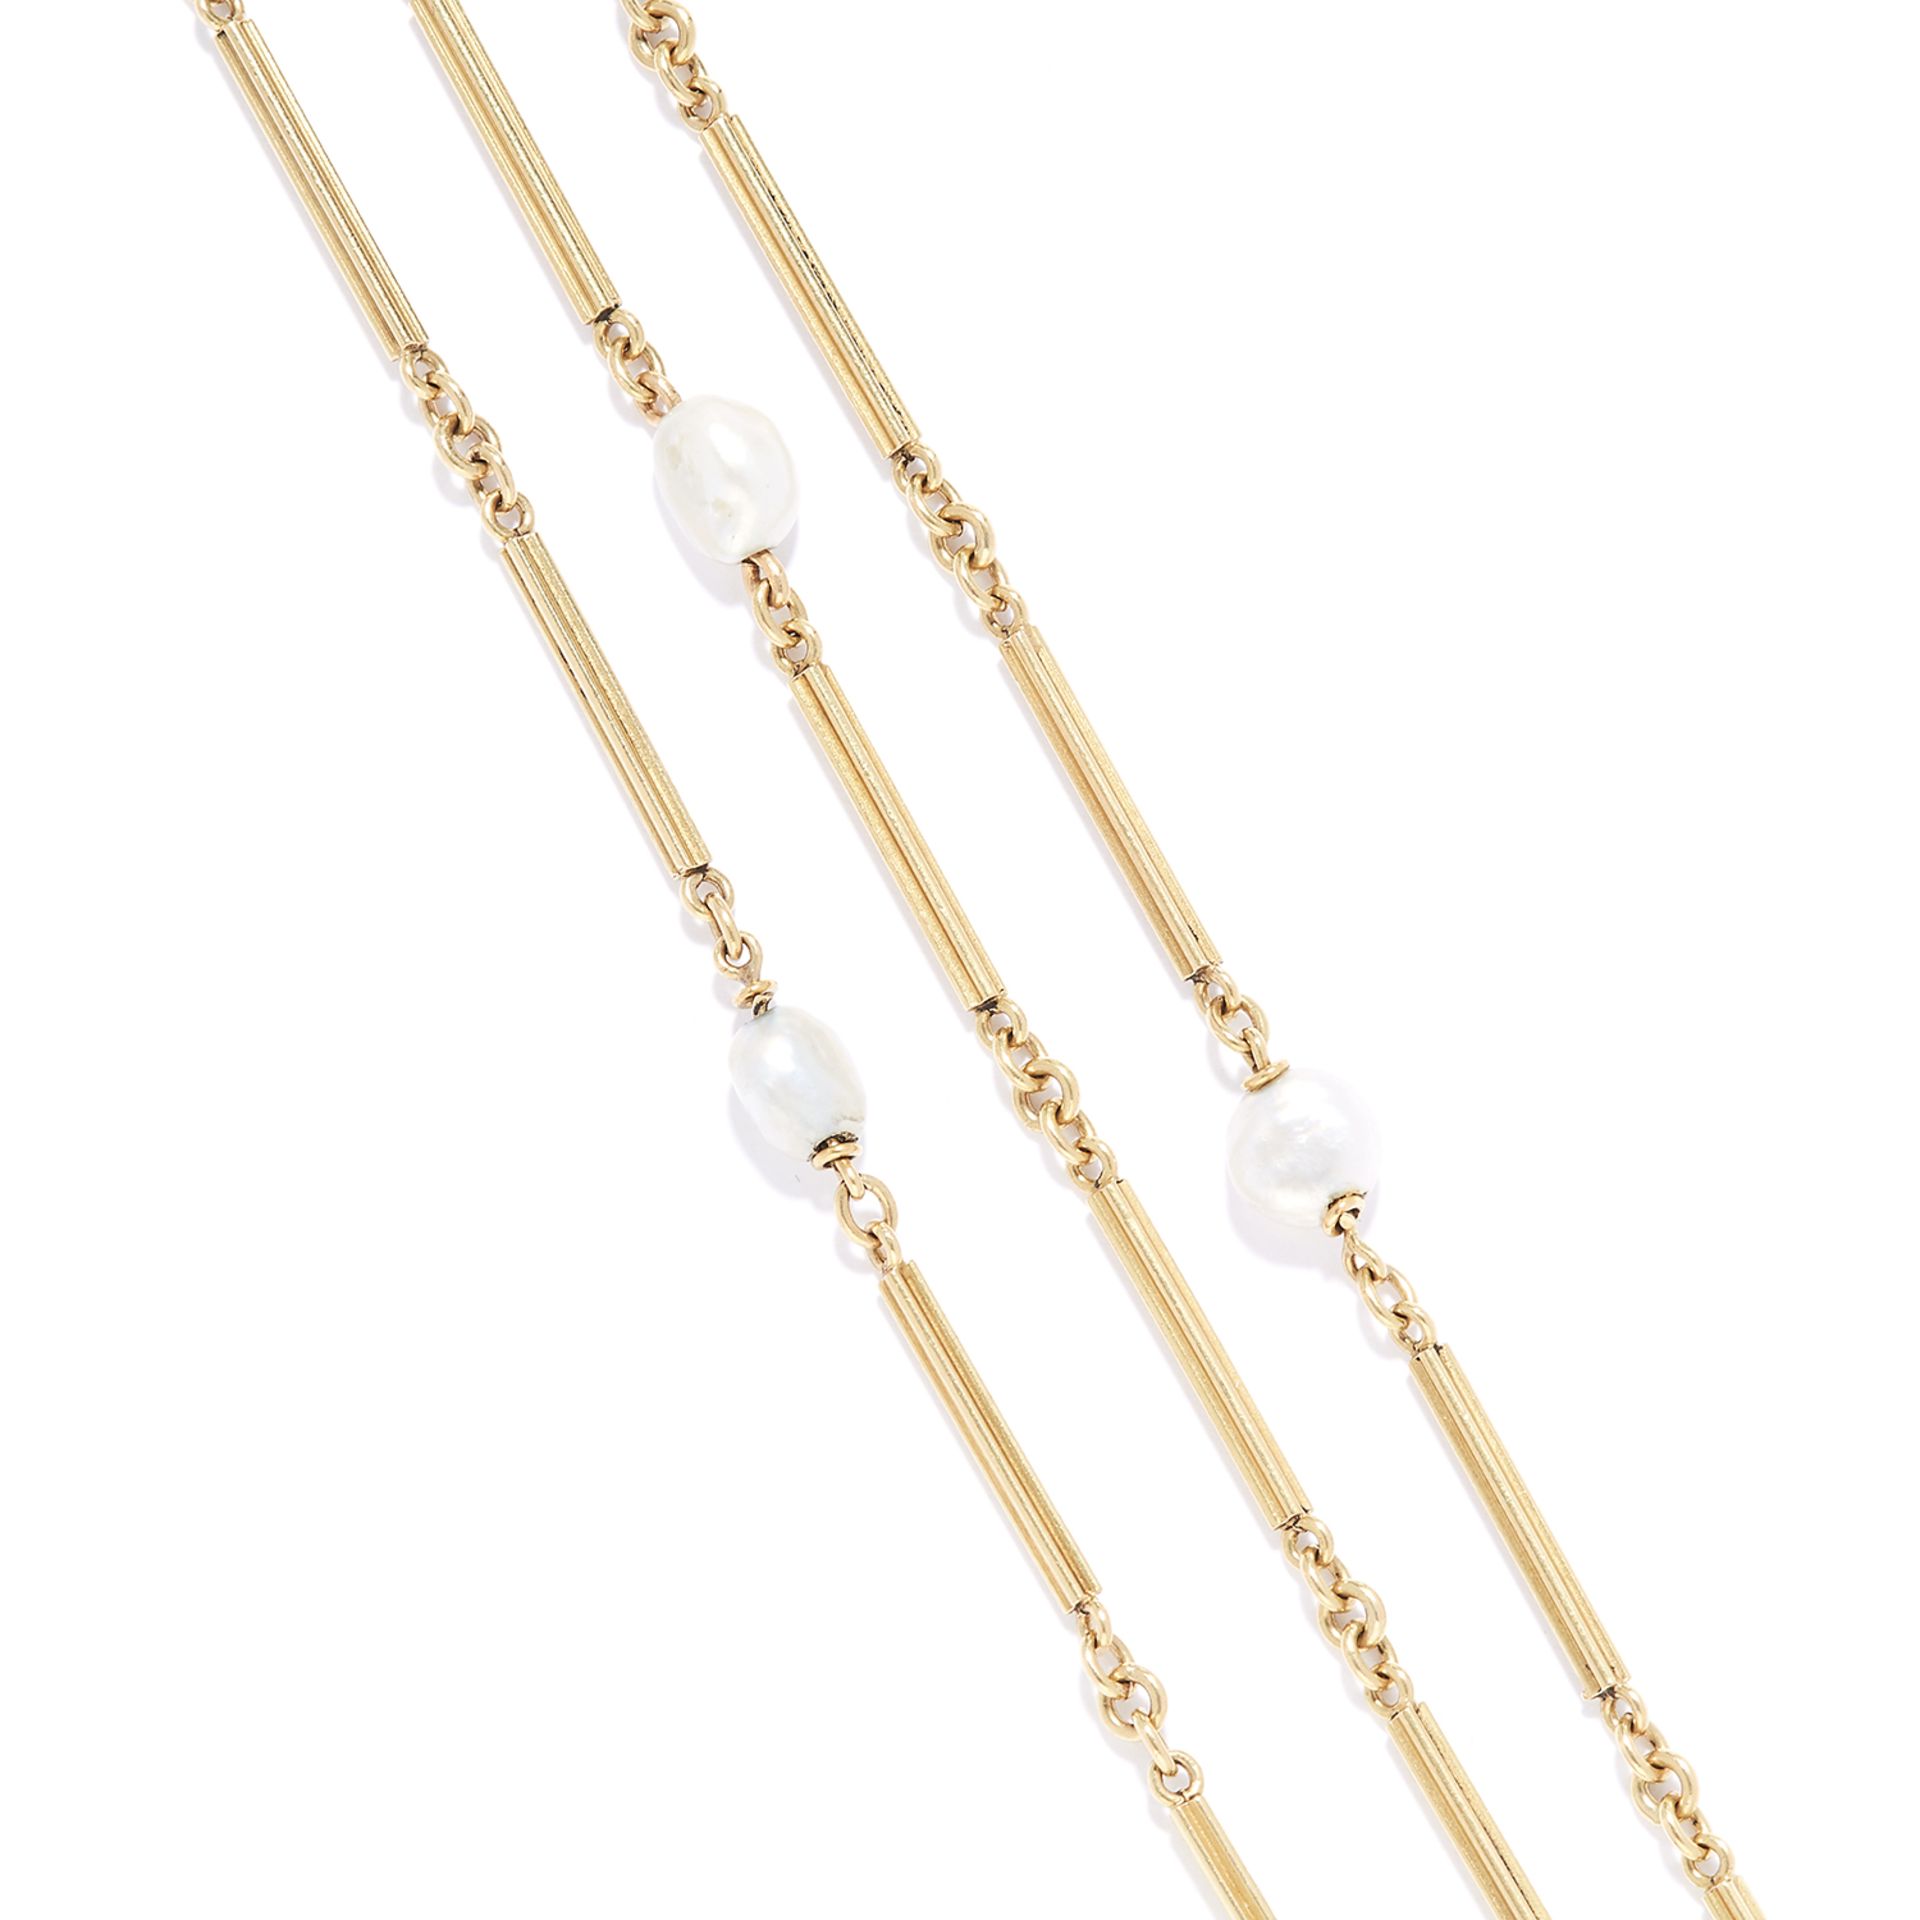 ANTIQUE PEARL LONGCHAIN SAUTOIR NECKLACE in high carat yellow gold, comprising a single row of fancy - Bild 2 aus 2